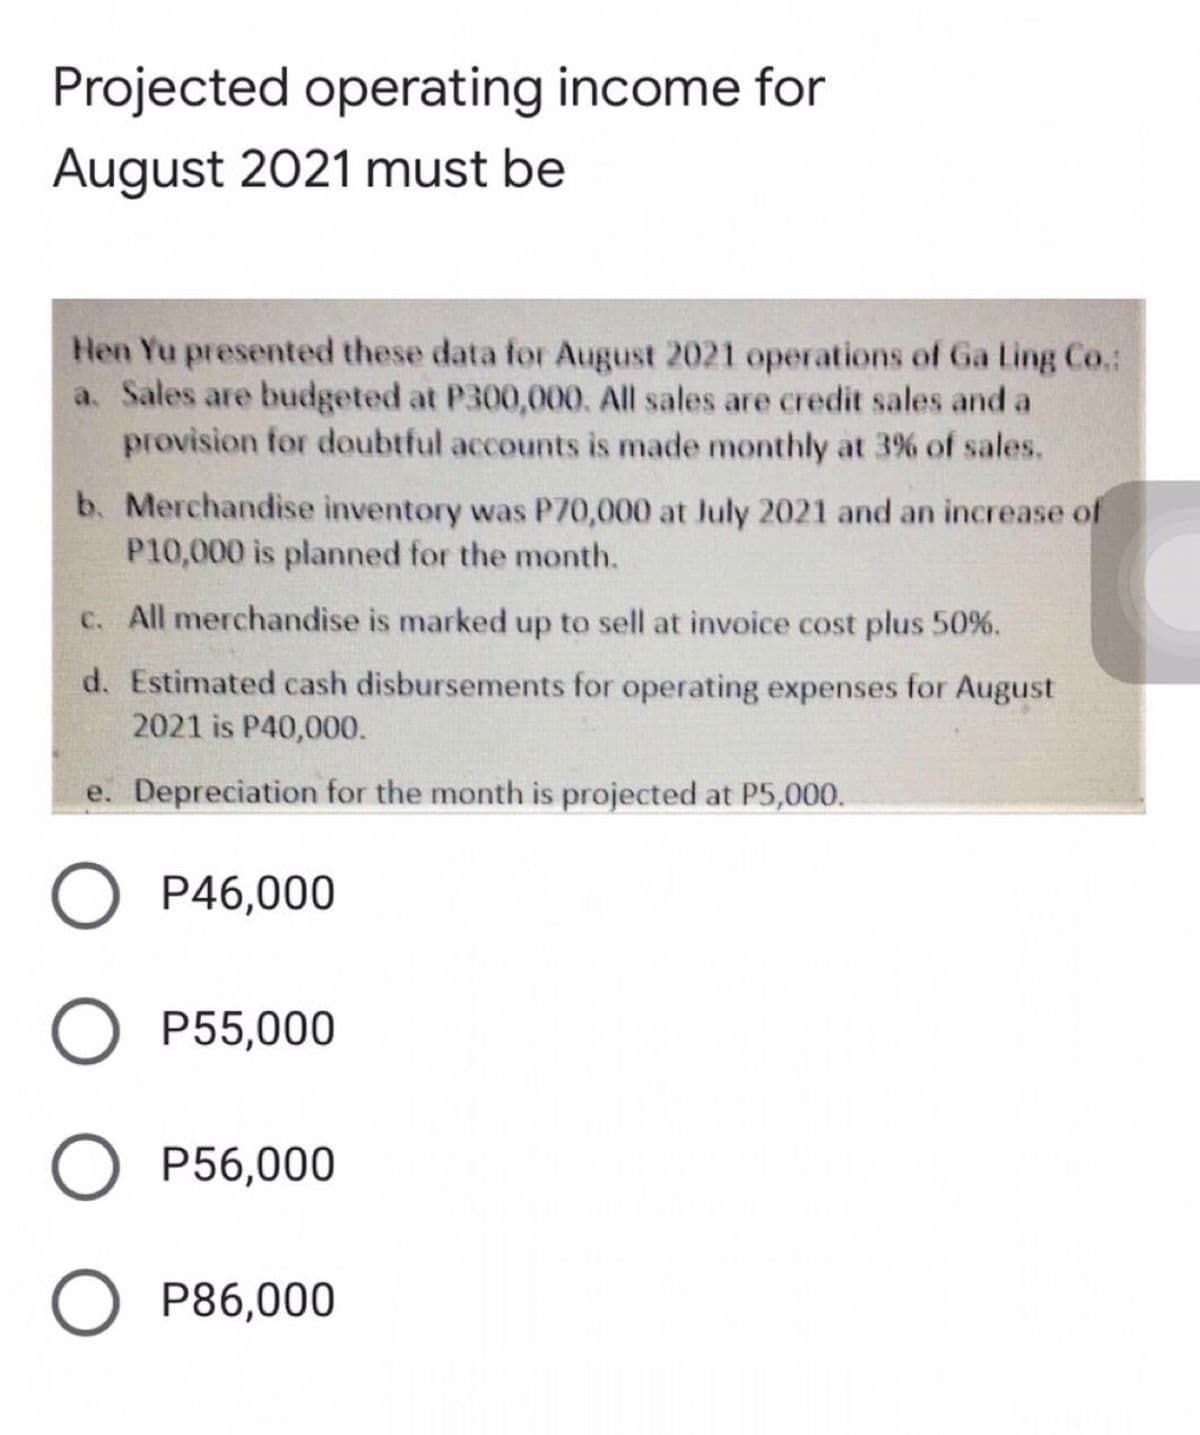 Projected operating income for
August 2021 must be
Hen Yu presented these data for August 2021 operations of Ga Ling Co.:
a. Sales are budgeted at P300,000. All sales are credit sales and a
provision for doubtful accounts is made monthly at 3% of sales.
b. Merchandise inventory was P70,000 at Jluly 2021 and an increase of
P10,000 is planned for the month.
C. All merchandise is marked up to sell at invoice cost plus 50%.
d. Estimated cash disbursements for operating expenses for August
2021 is P40,000.
e. Depreciation for the month is projected at P5,000.
P46,000
P55,000
O P56,000
O P86,000
